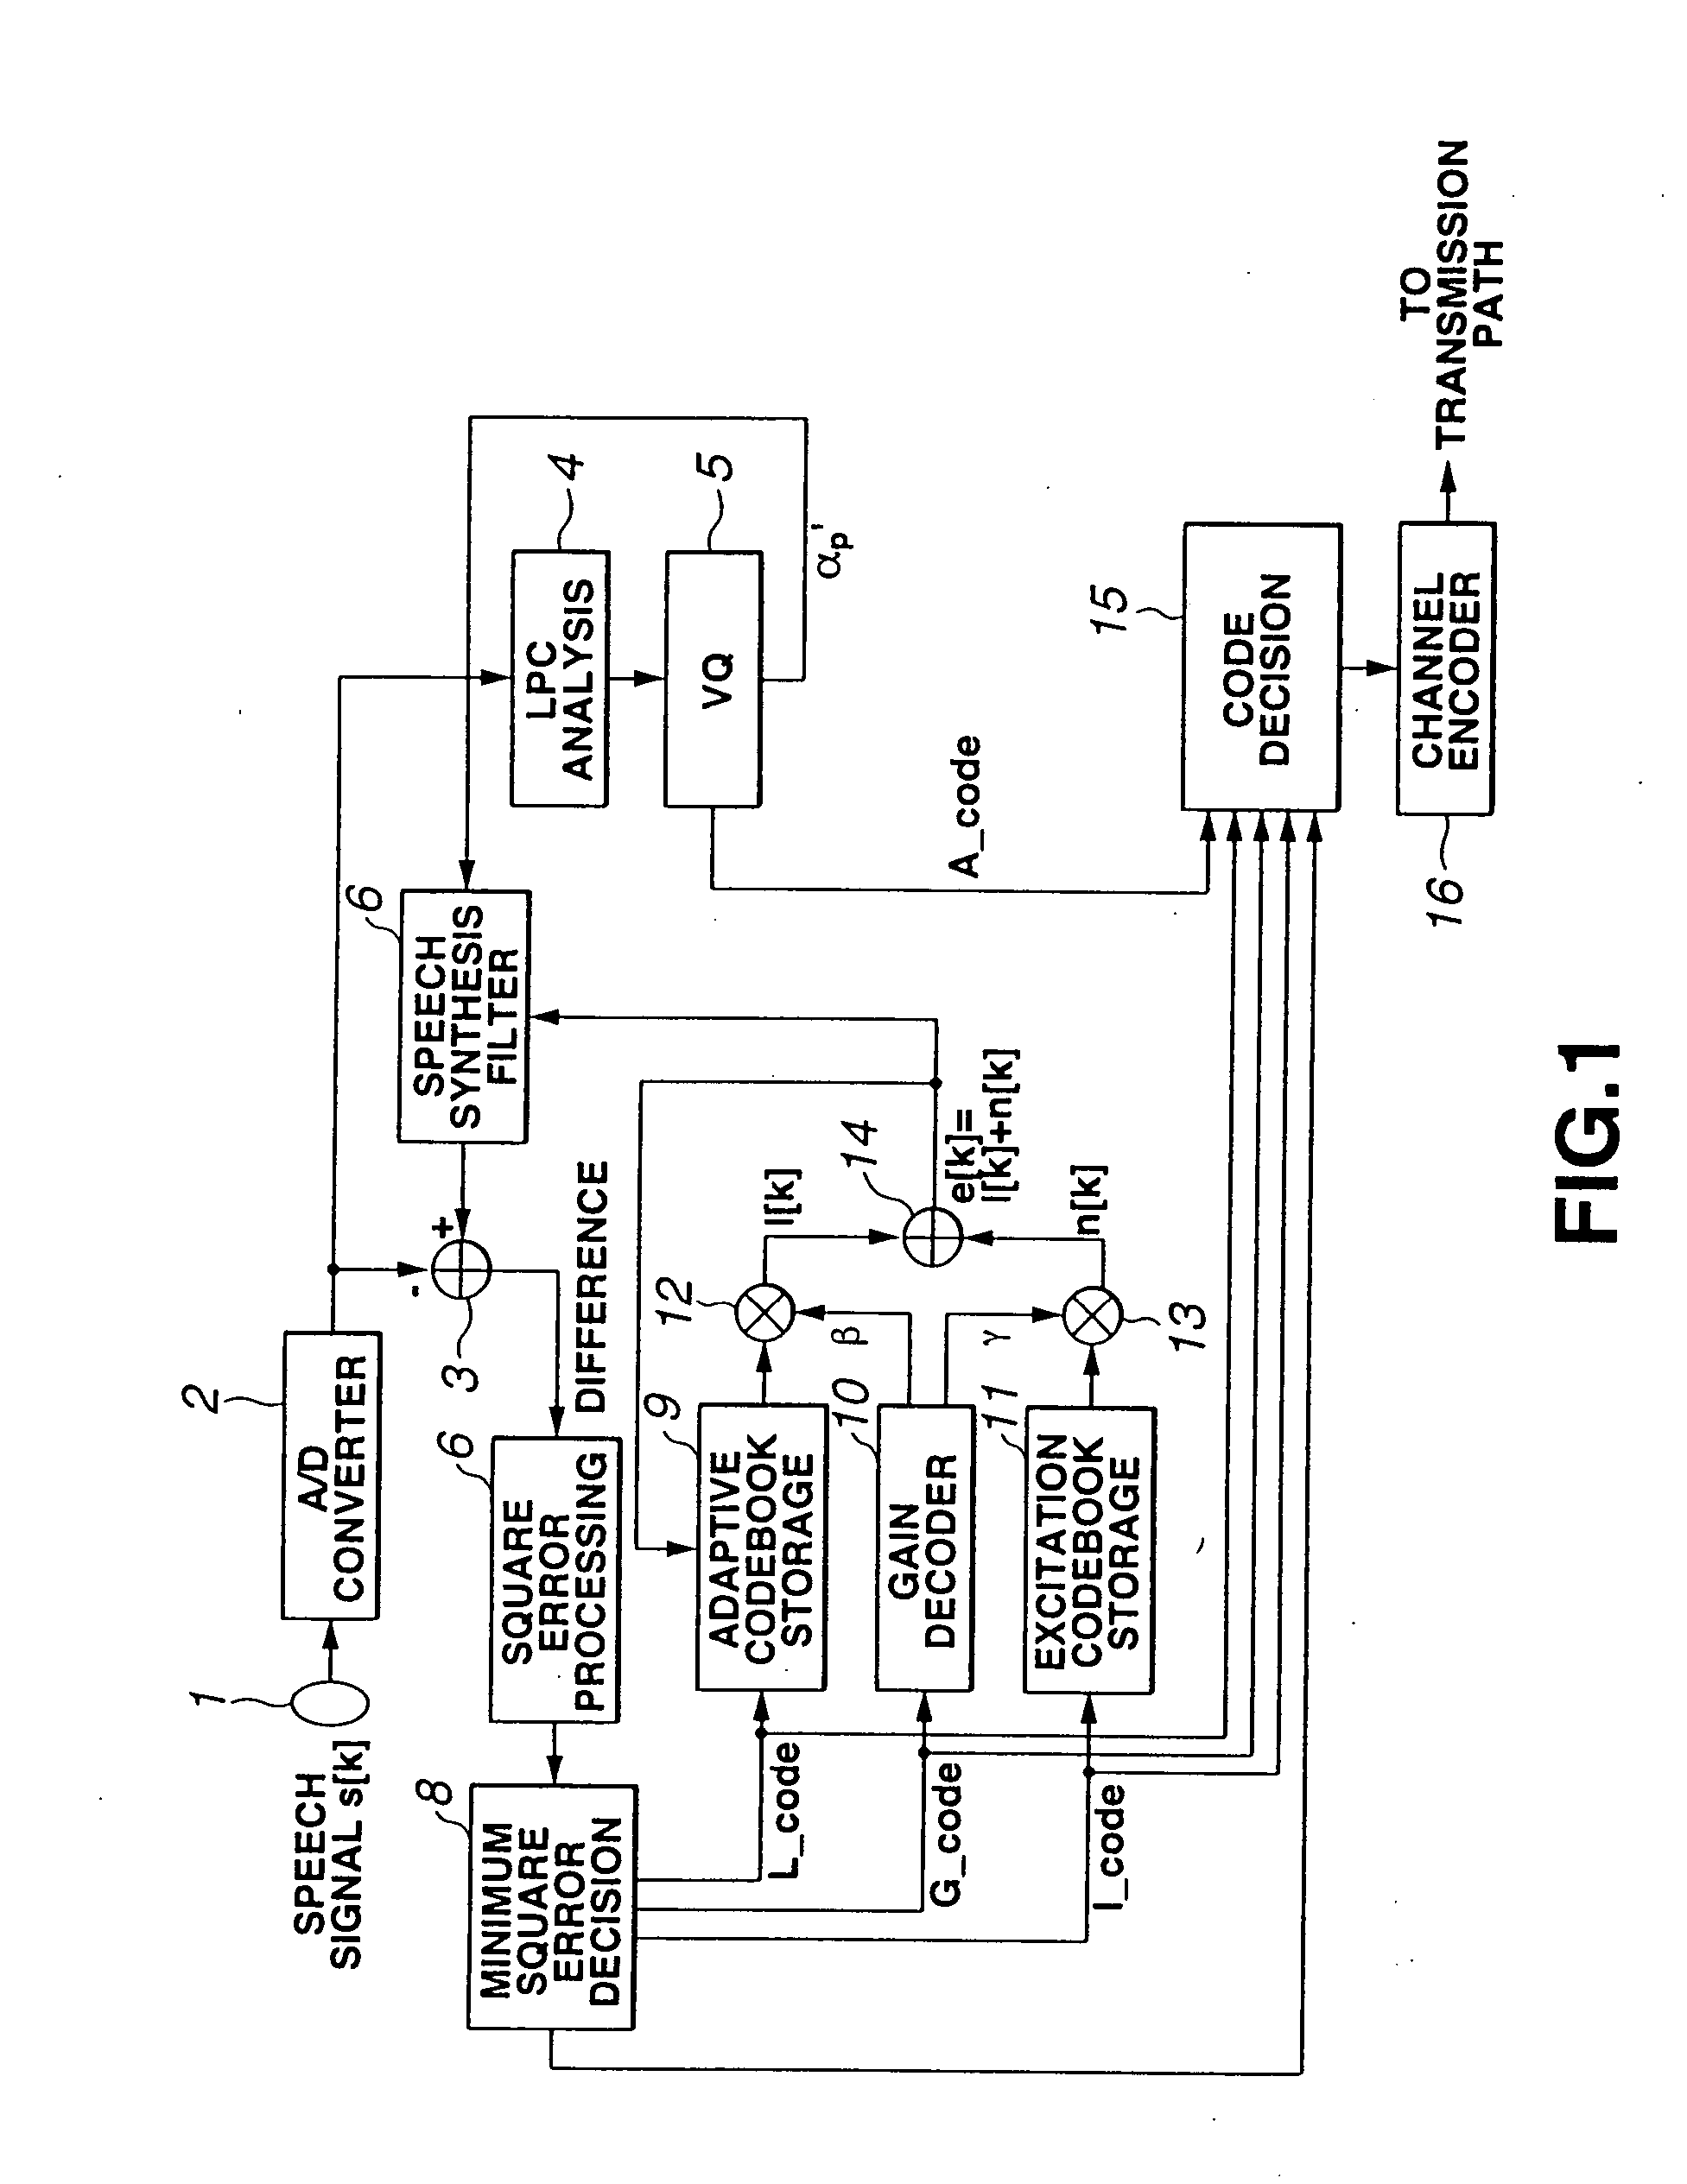 Method and apparatus for speech data